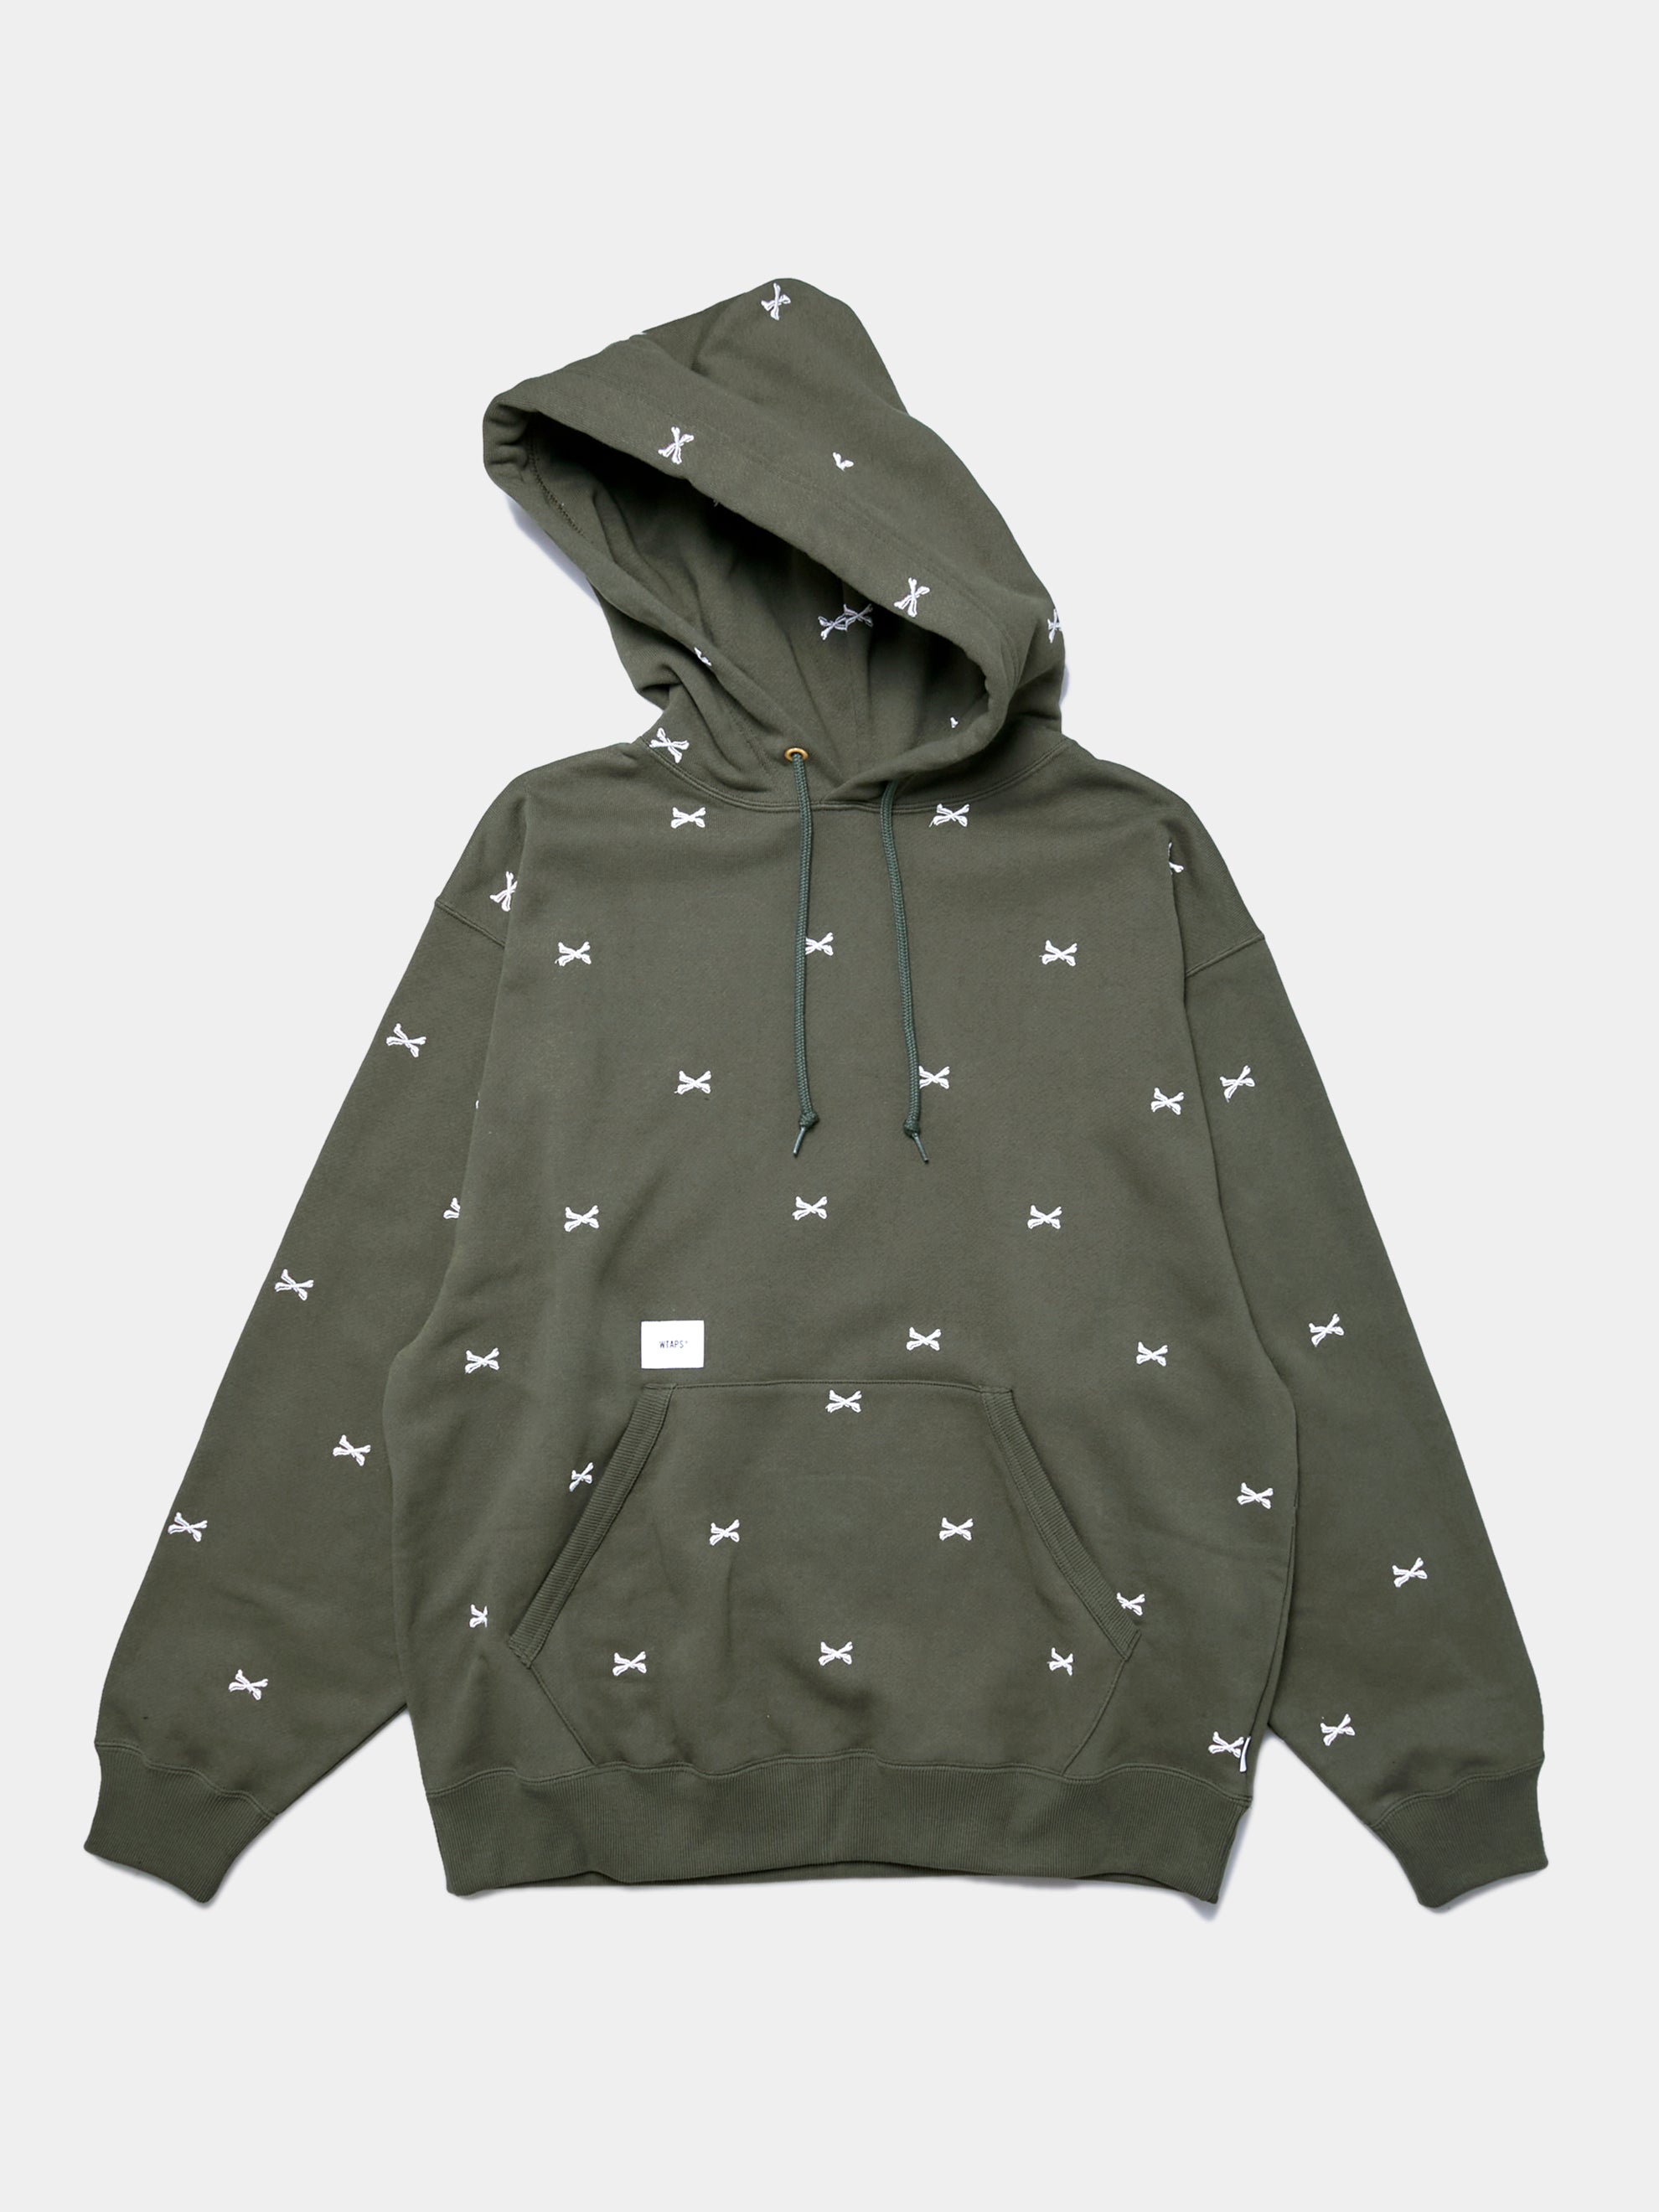 Buy Wtaps ACNE / HOODY / COTTON (Olive Drab) Online at UNION LOS